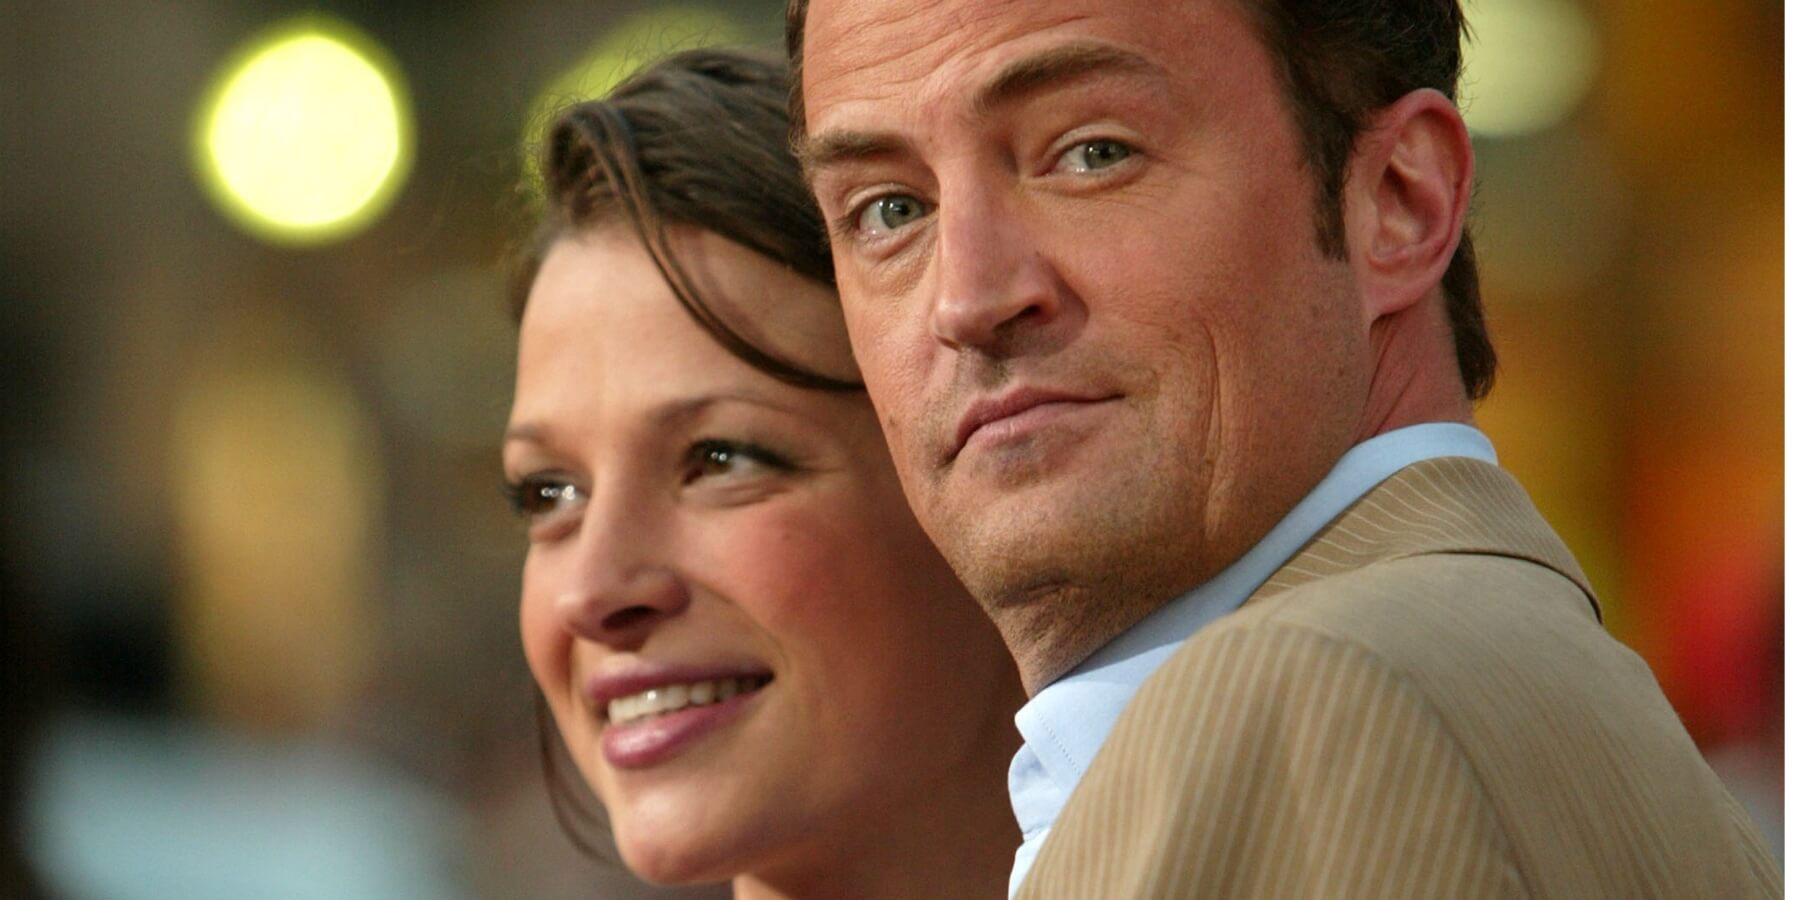 Rachel Dunn and Matthew Perry at a movie premiere.